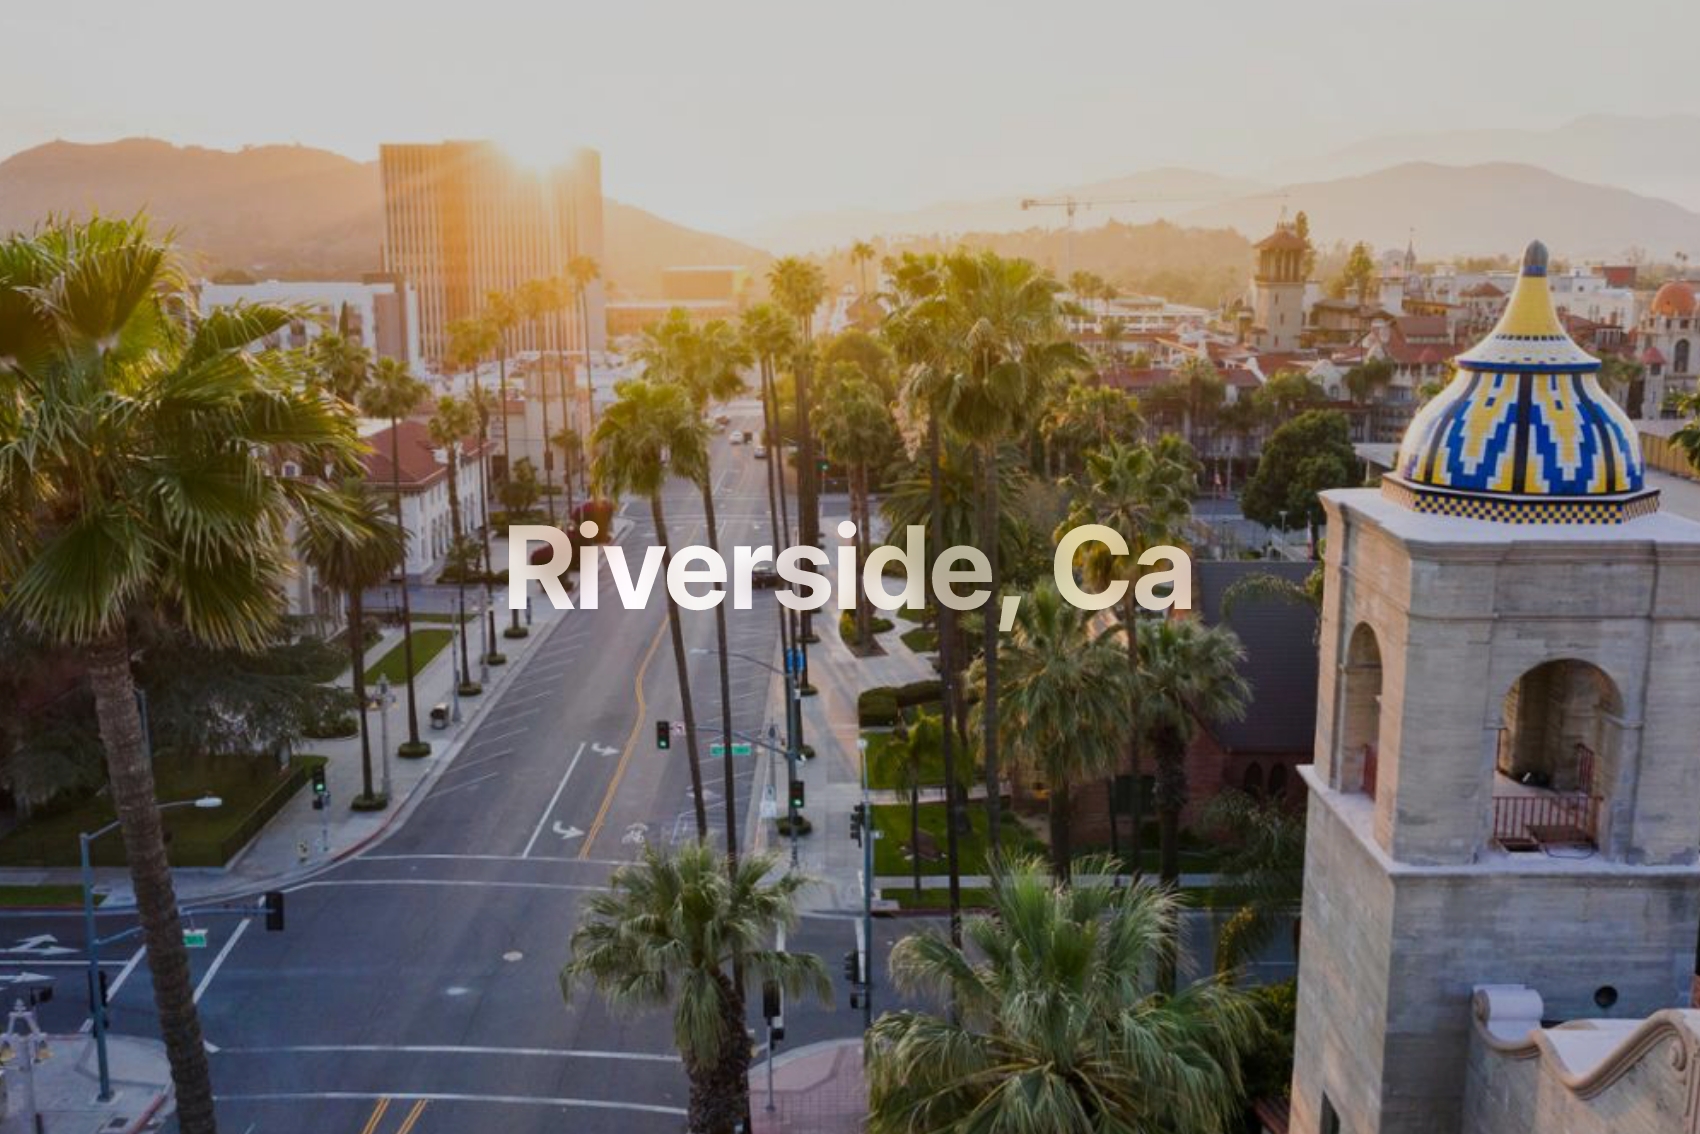 Image of the city of Riverside, Ca